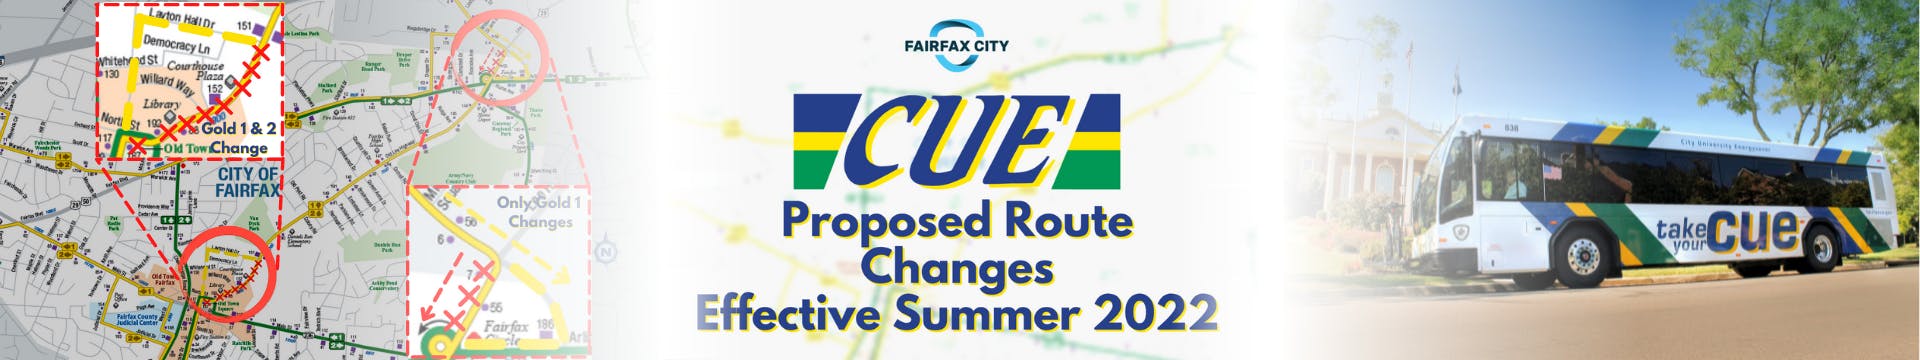 Cue Bus Proposed Route Changes